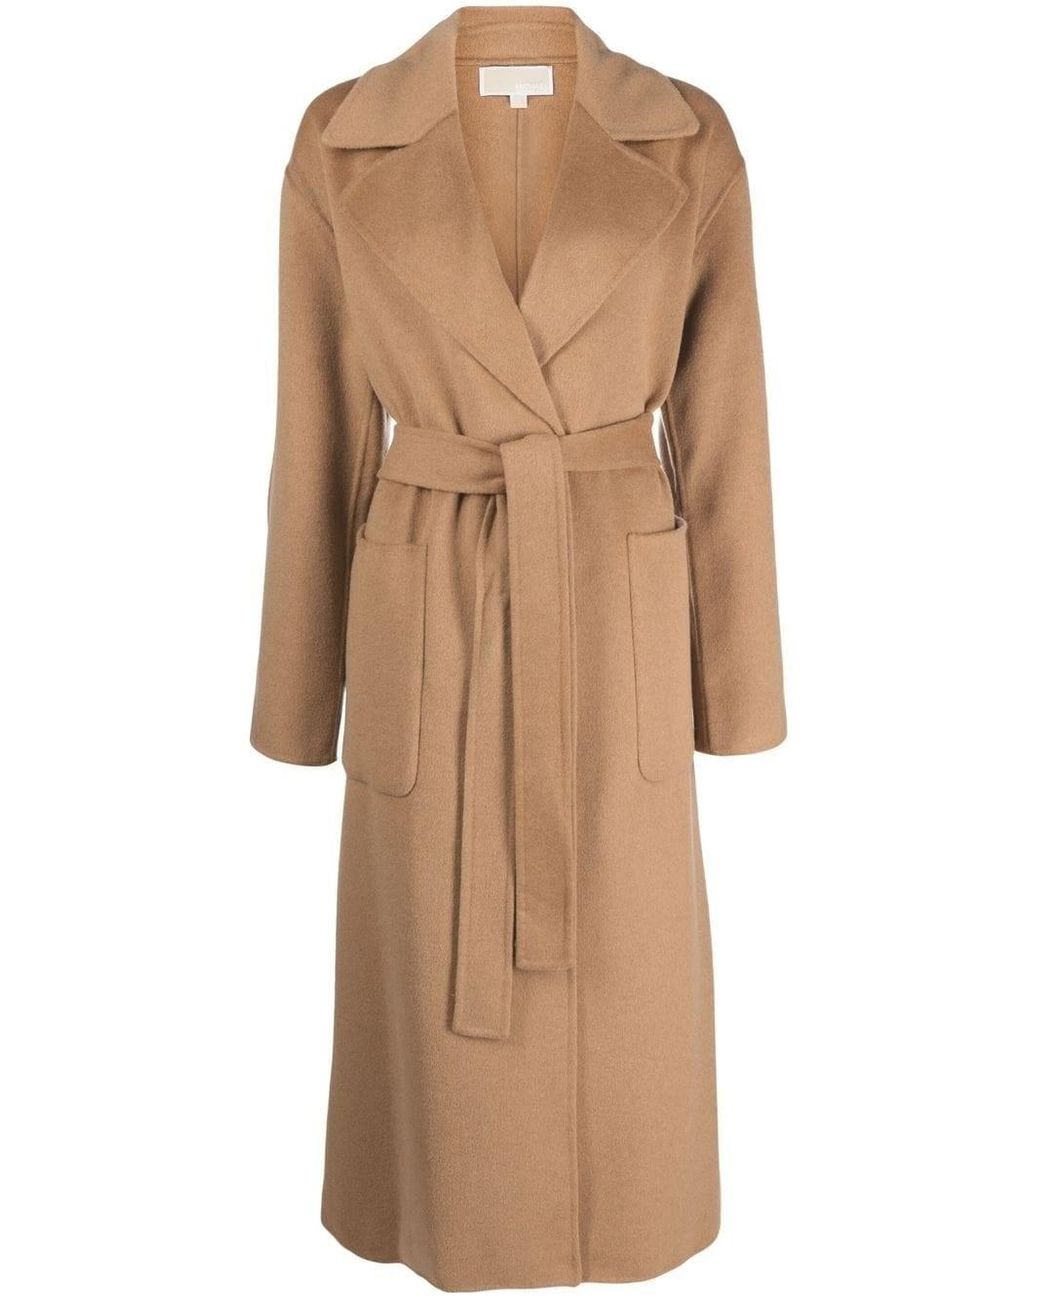 MICHAEL Michael Kors Belted Wool-blend Coat in Natural | Lyst